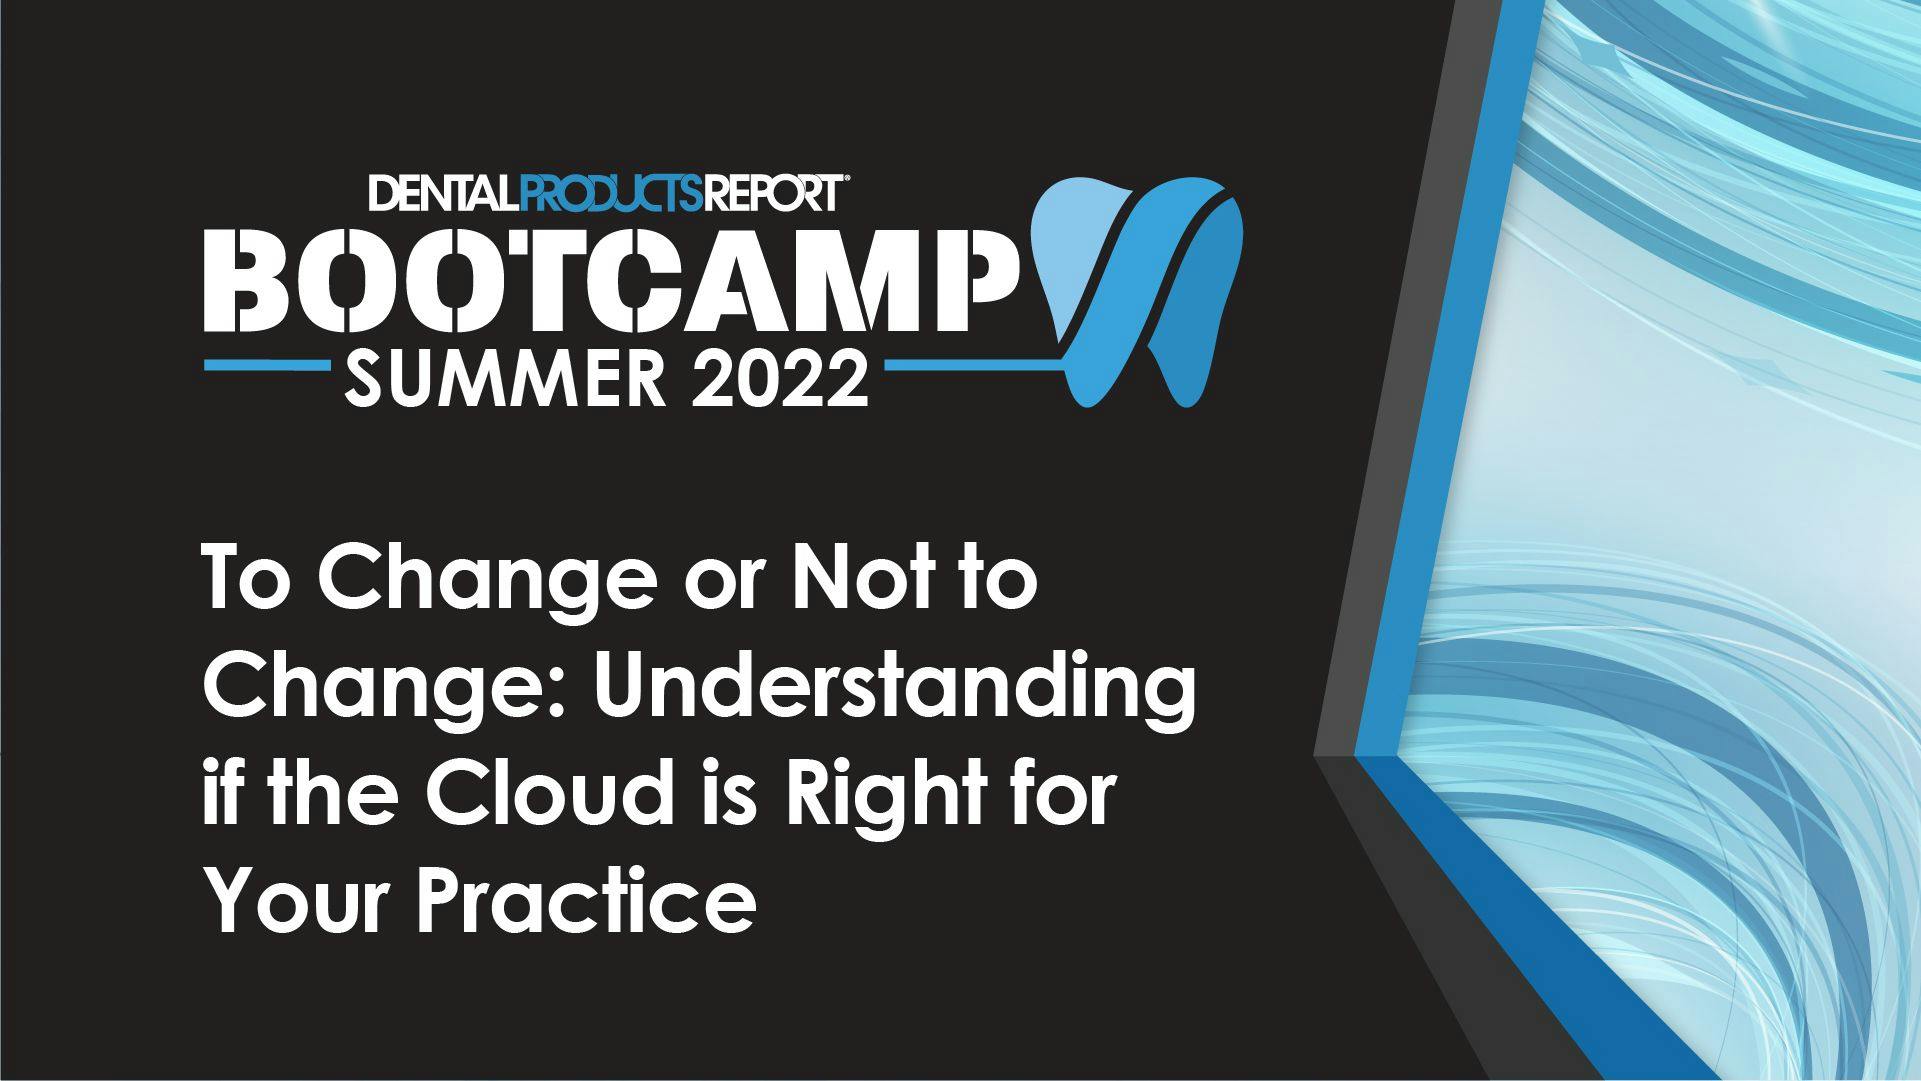 To Change or Not to Change: Understanding if the Cloud is Right for Your Practice